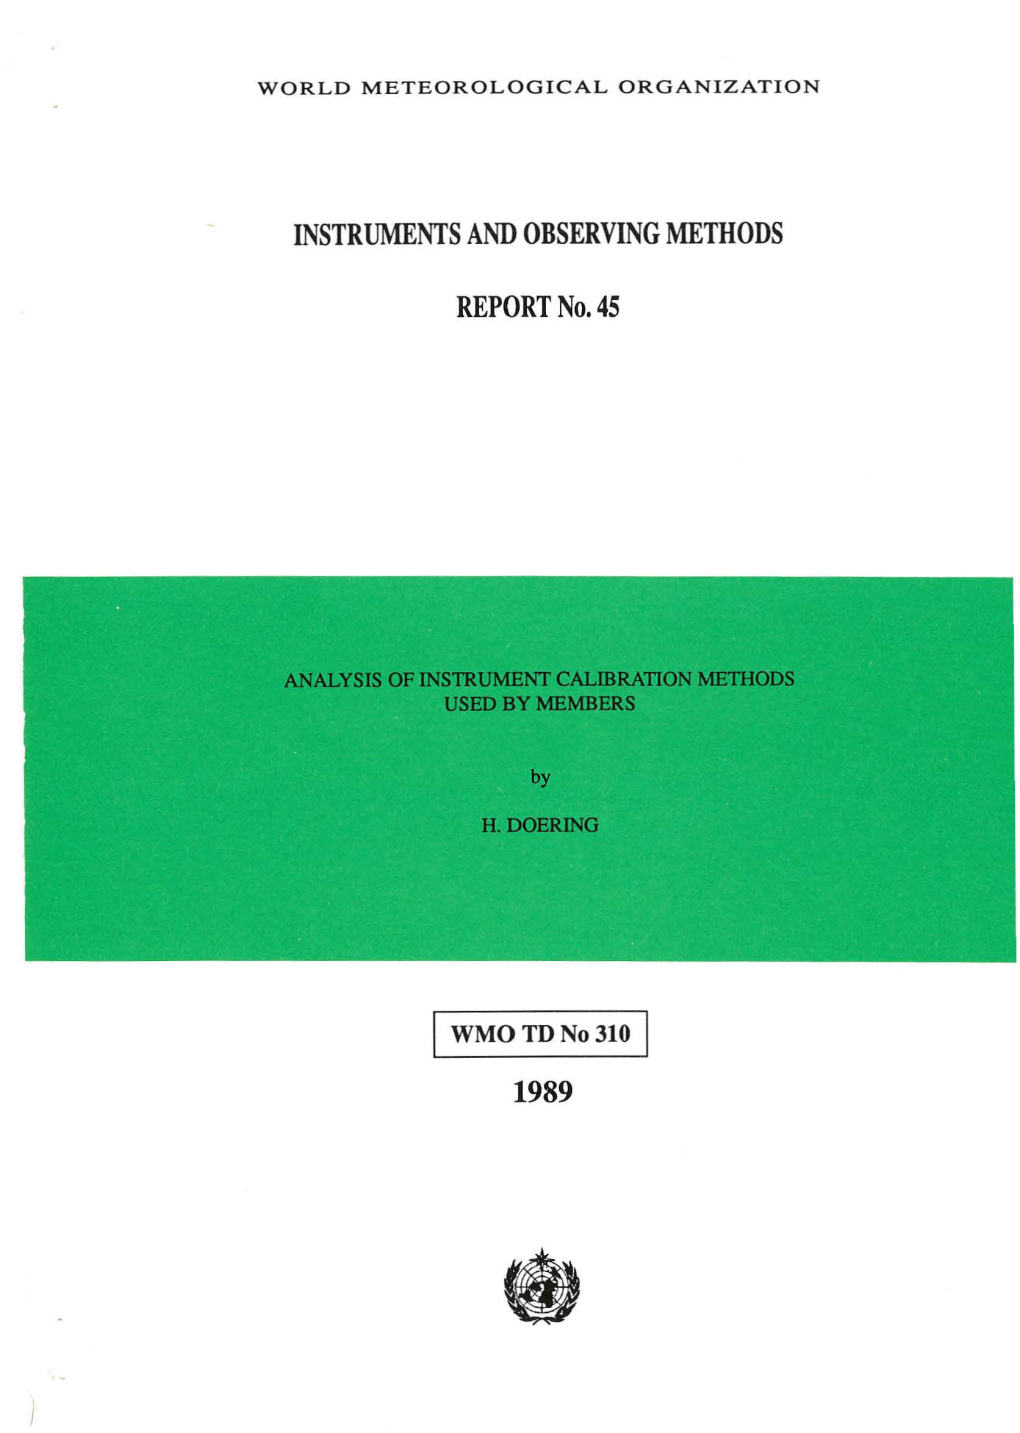 INSTRUMENTS and OBSERVING METHODS REPORT No. 45